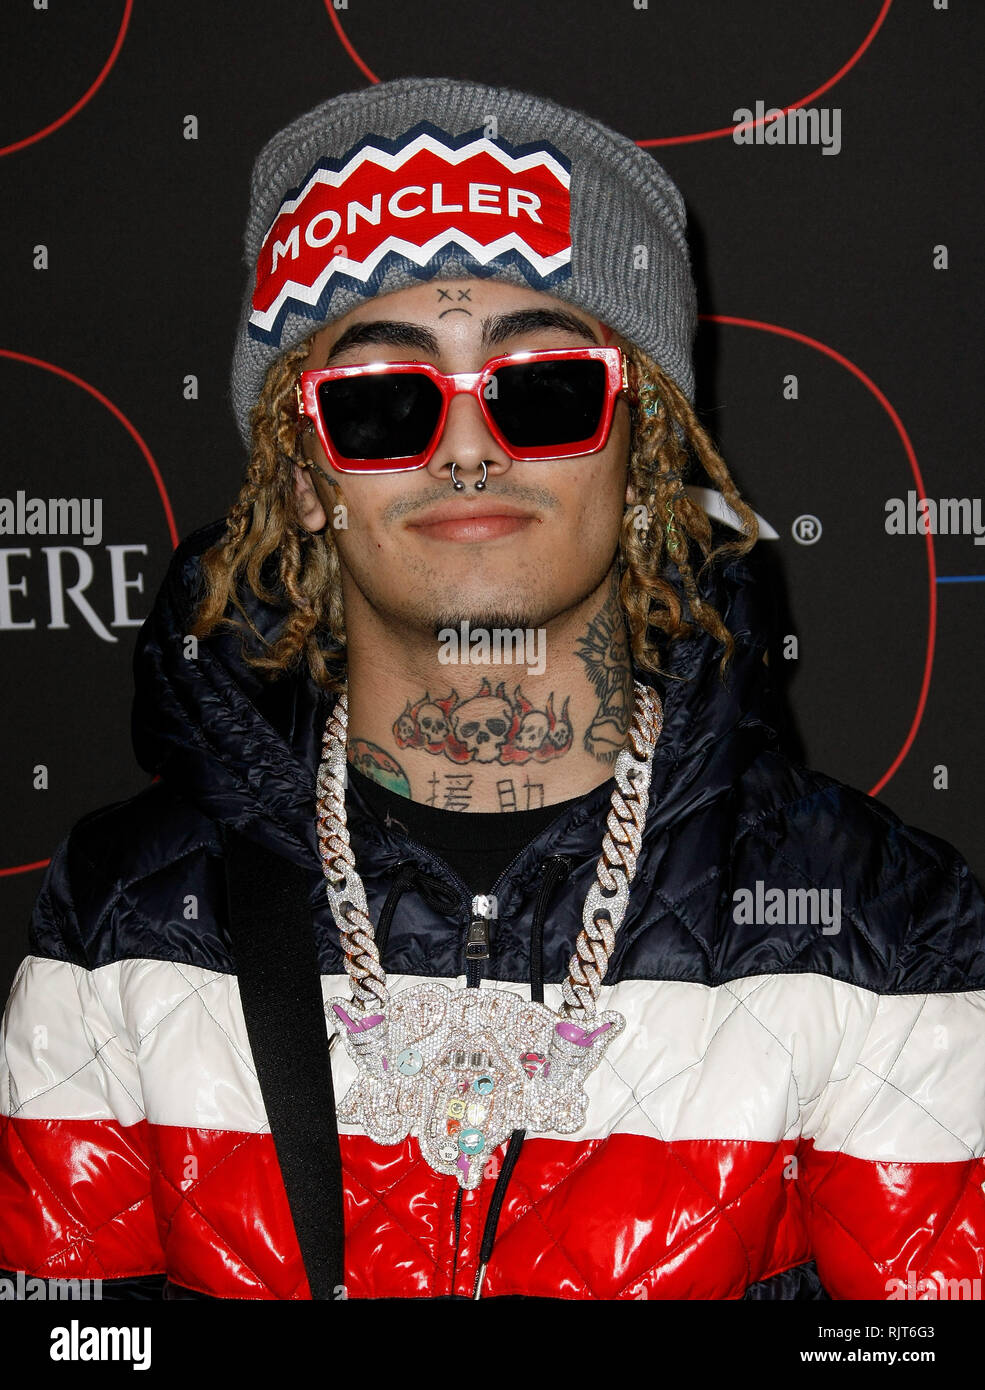 Los Angeles, USA. 07th Feb, 2019. Lil' Pump attends the Warner Music Pre-Grammy Party at the NoMad Hotel on February 7, 2019 in Los Angeles, California. Photo: CraSH/imageSPACE Credit: Imagespace/Alamy Live News Stock Photo